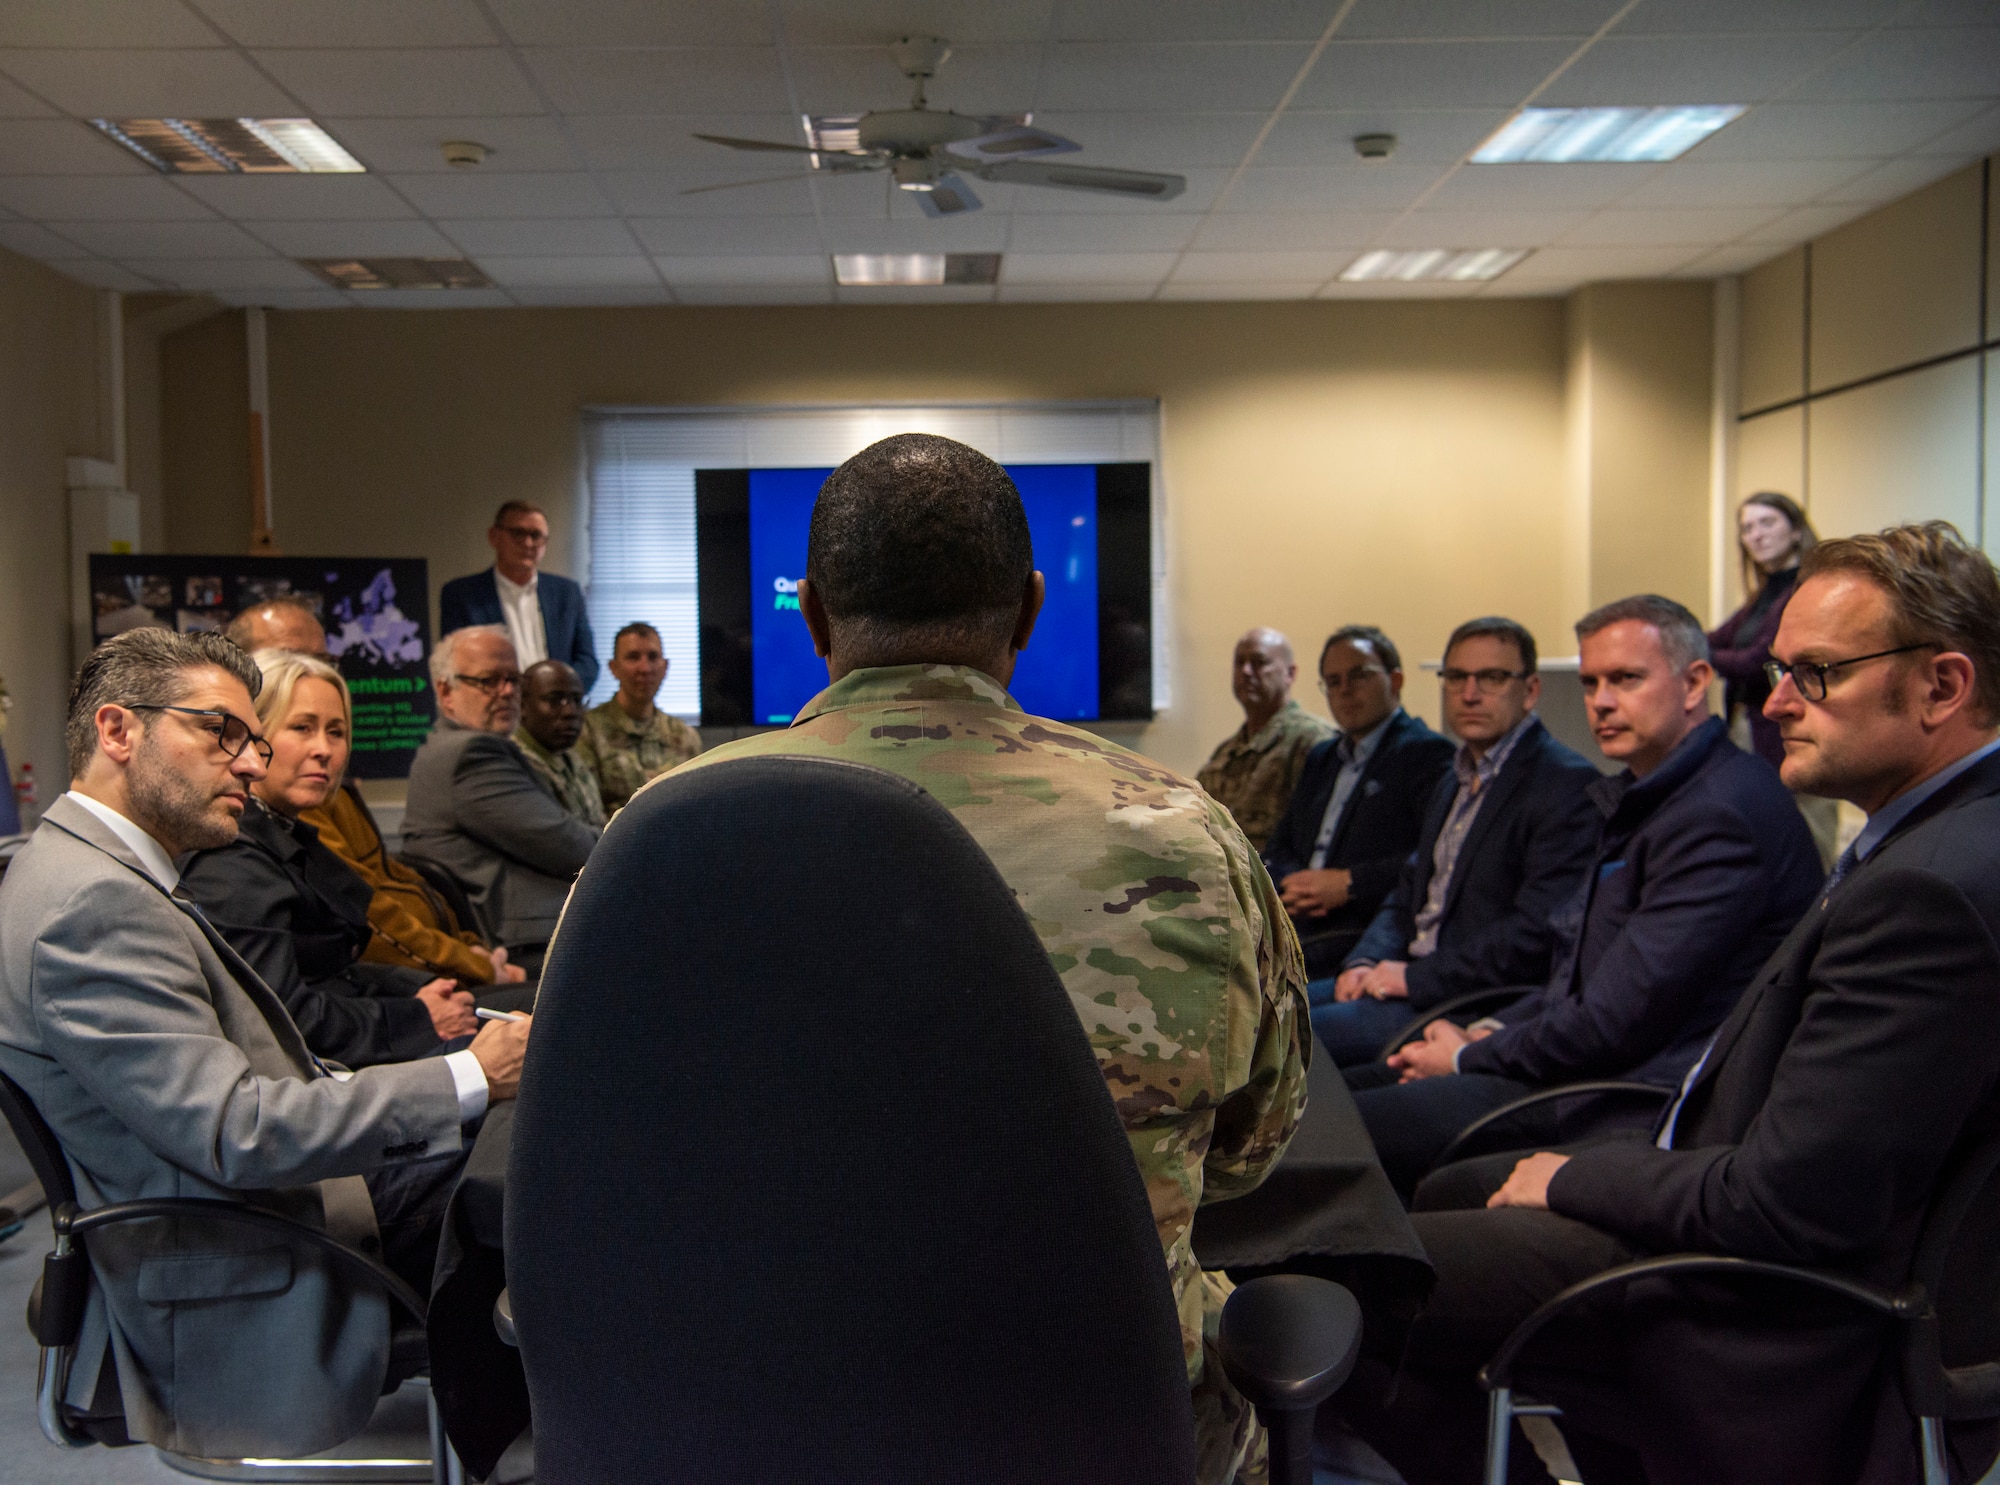 U.S. Air Force Brig. Gen. Otis C. Jones, 86th Airlift Wing commander, speaks with local German dignitaries during a tour of a storage facility in Pirmasens, Germany, May 12, 2023.